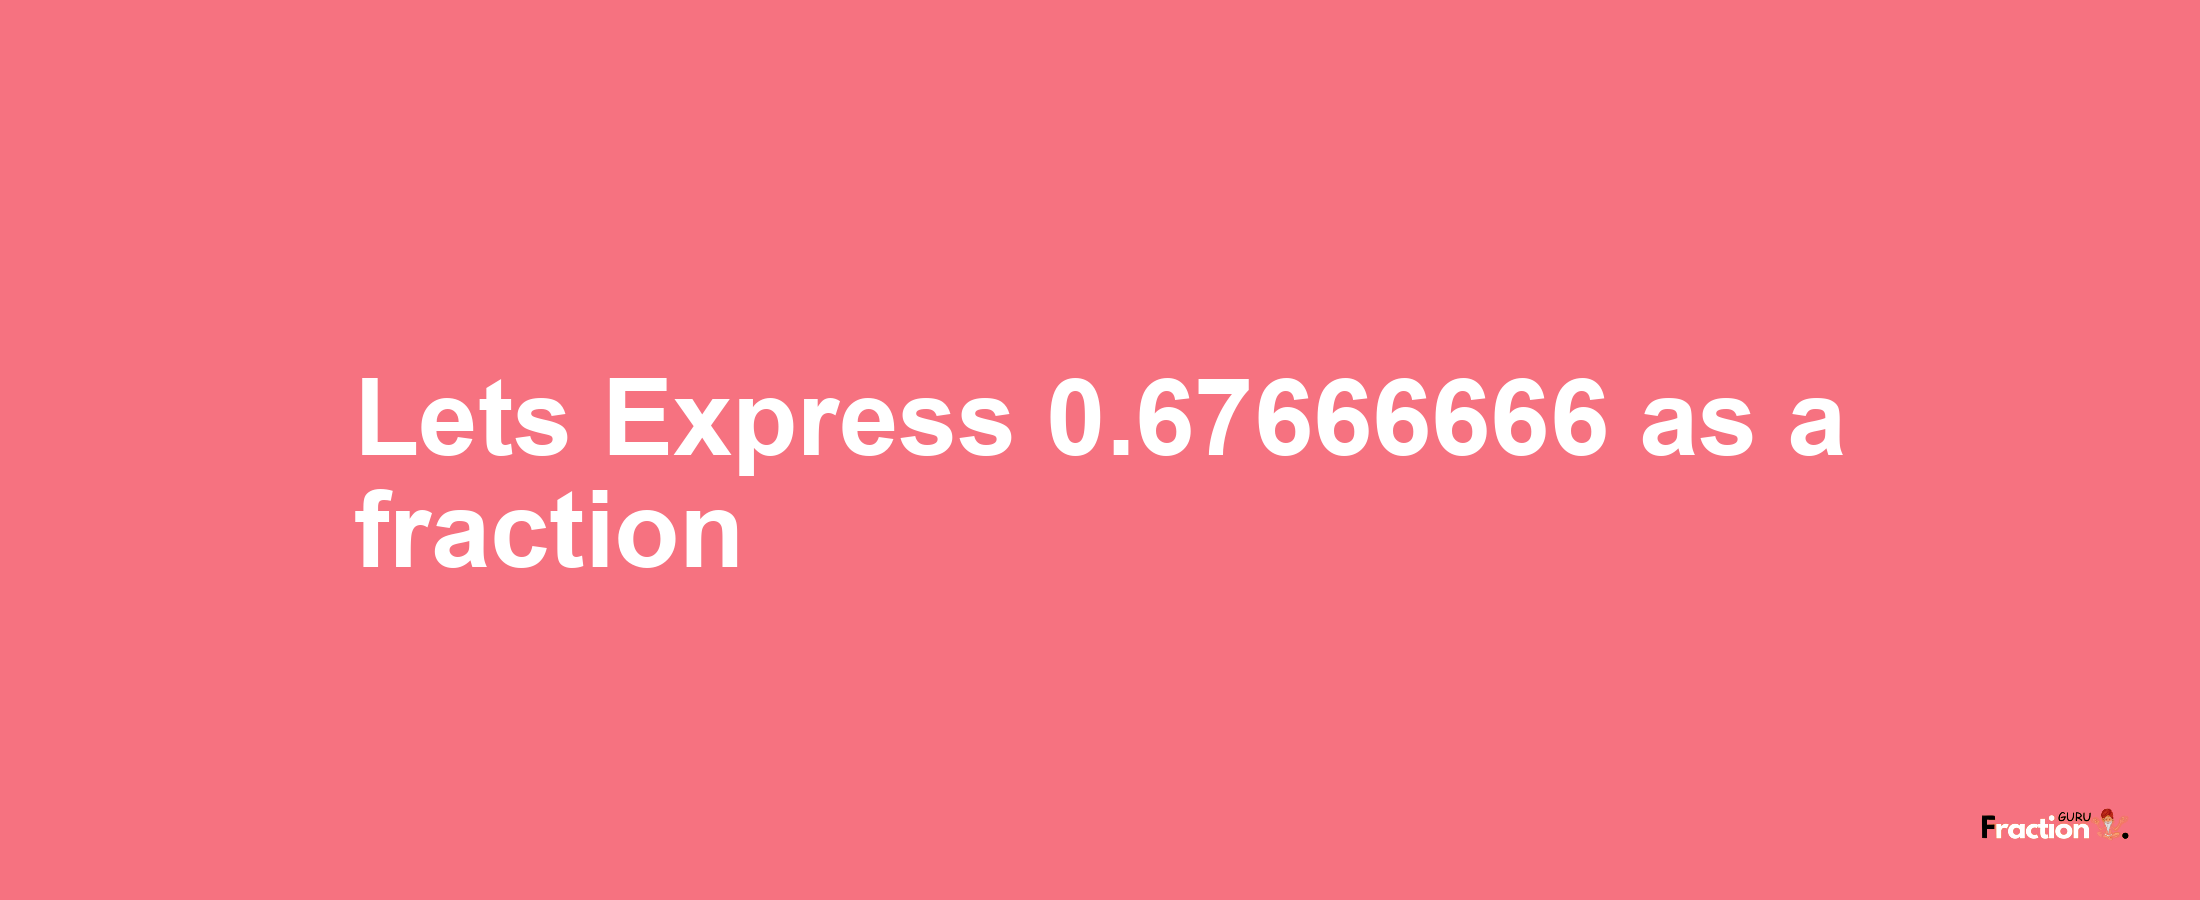 Lets Express 0.67666666 as afraction